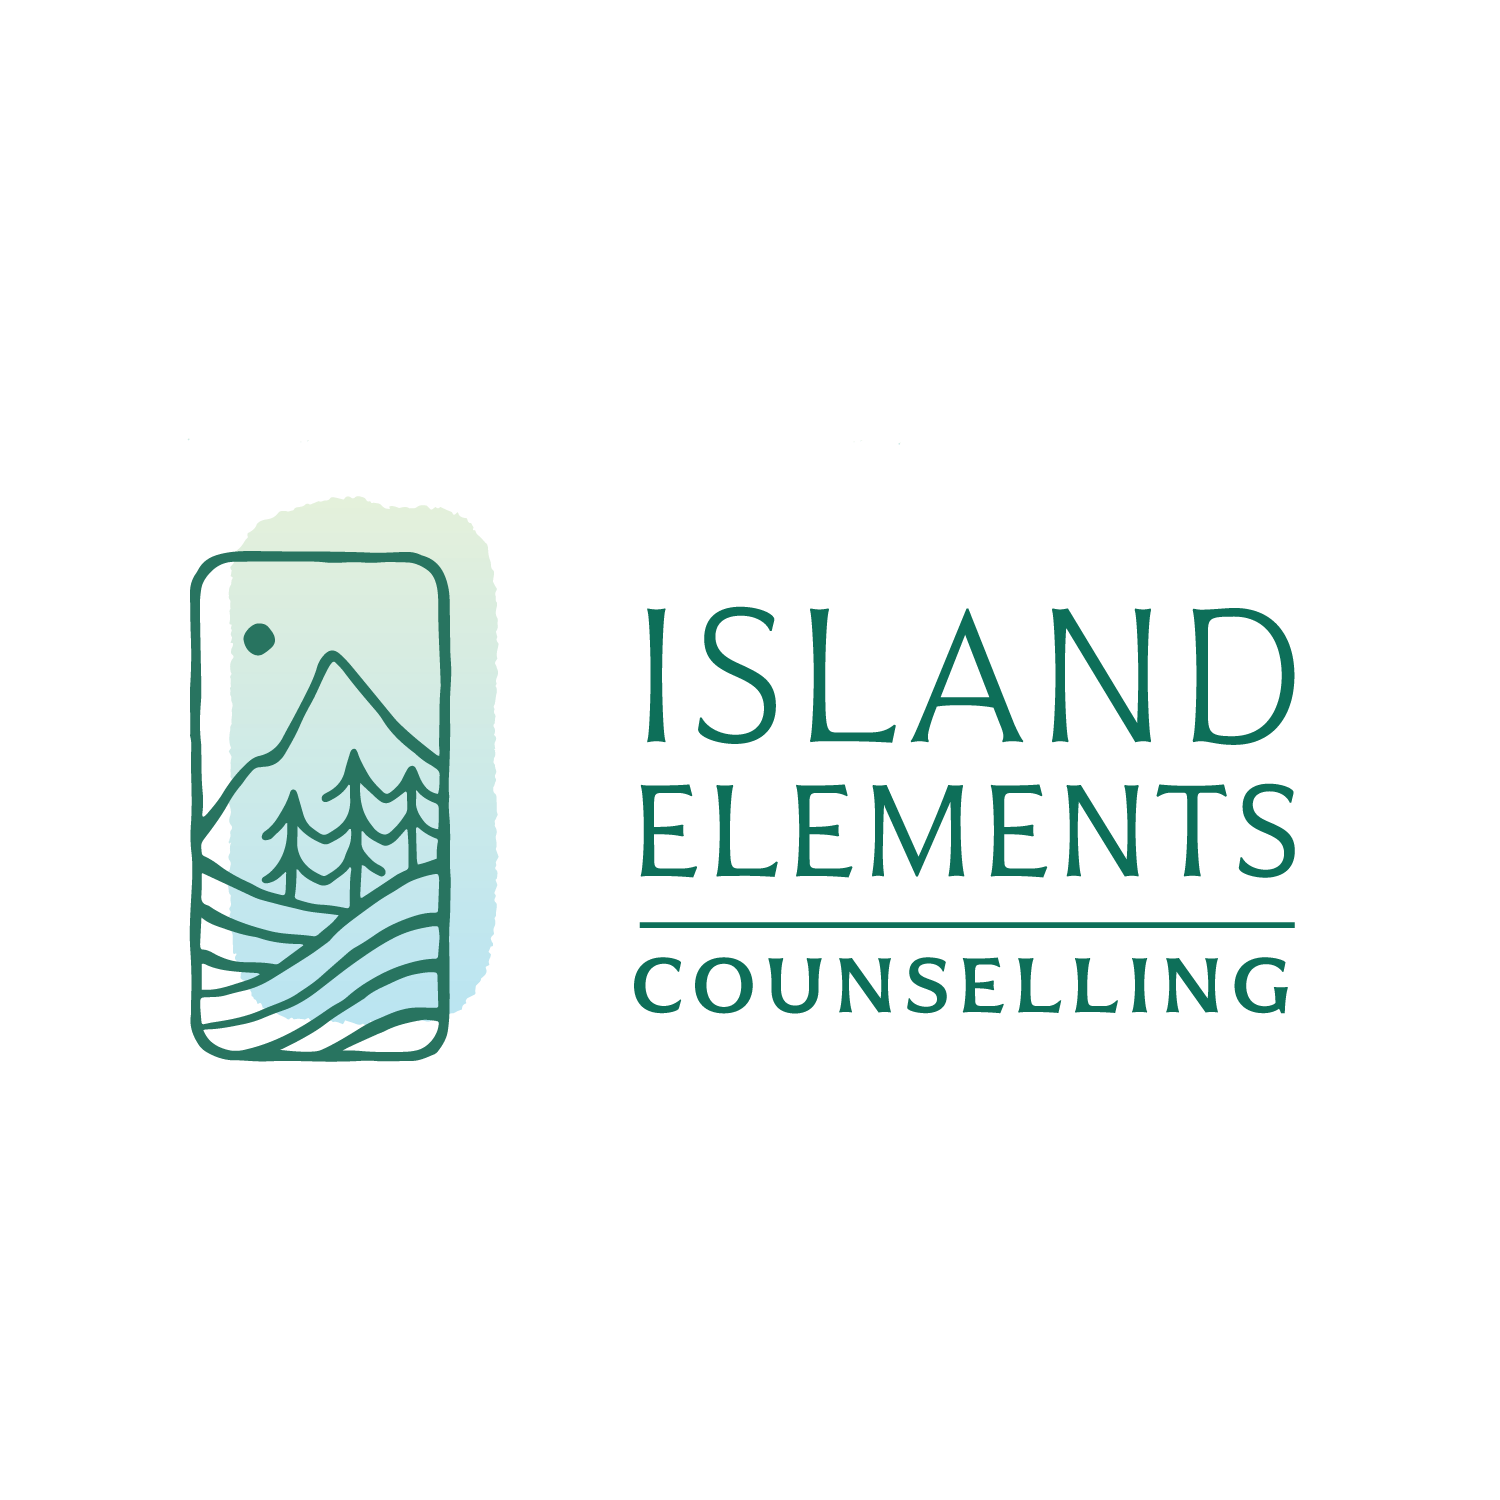 Island Elements Counselling